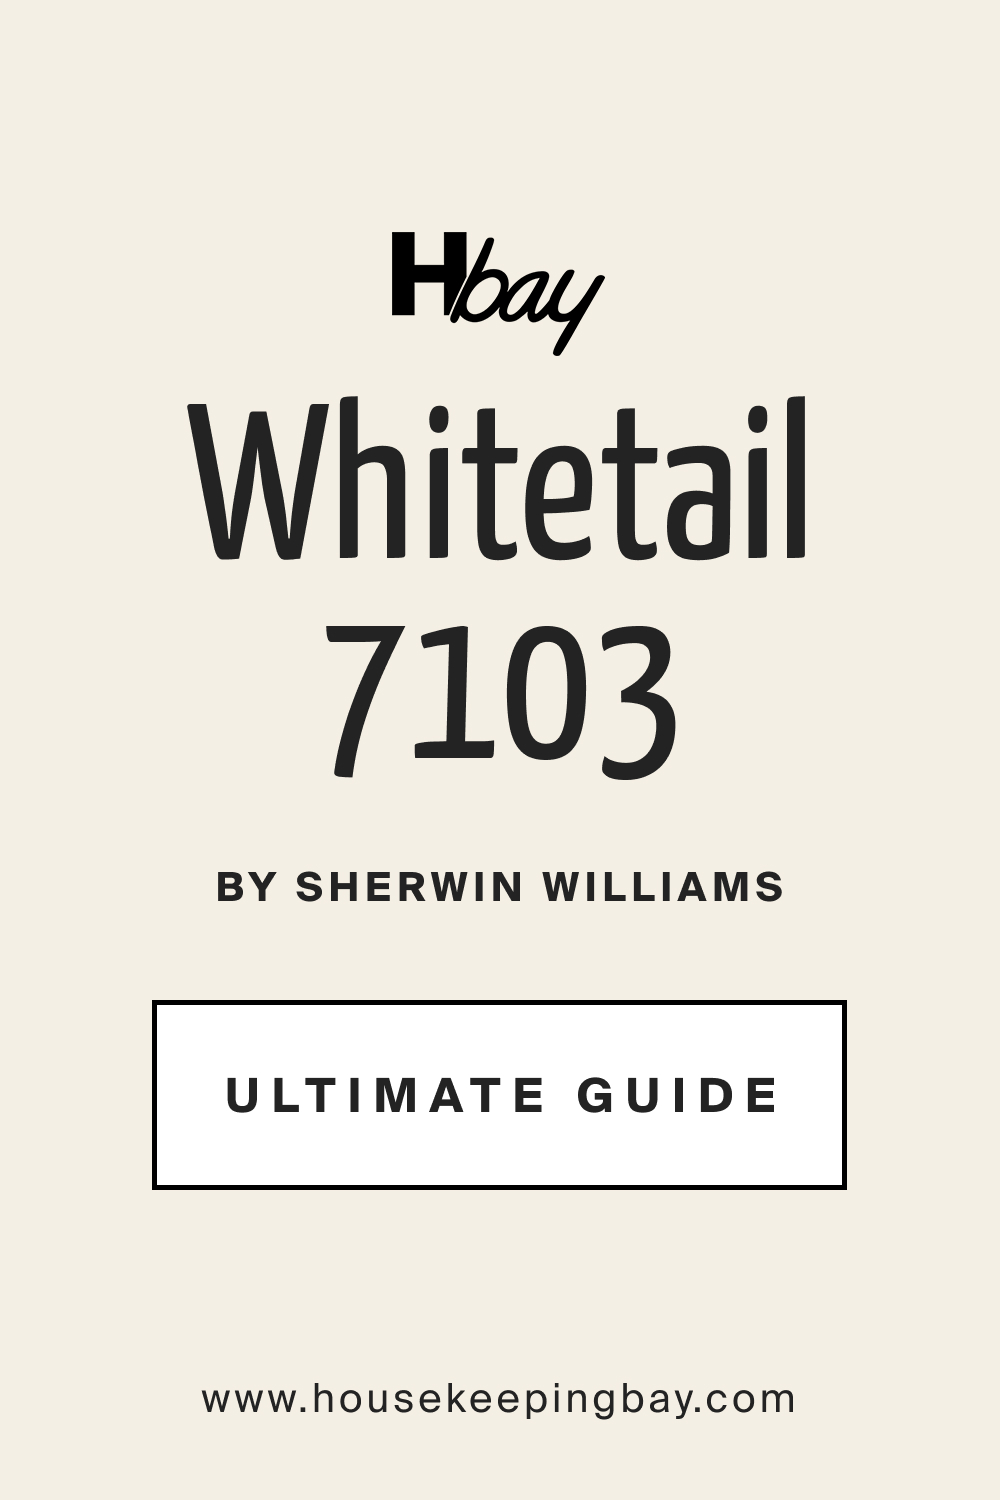 Whitetail SW 7103 by Sherwin Williams Ultimate Guide